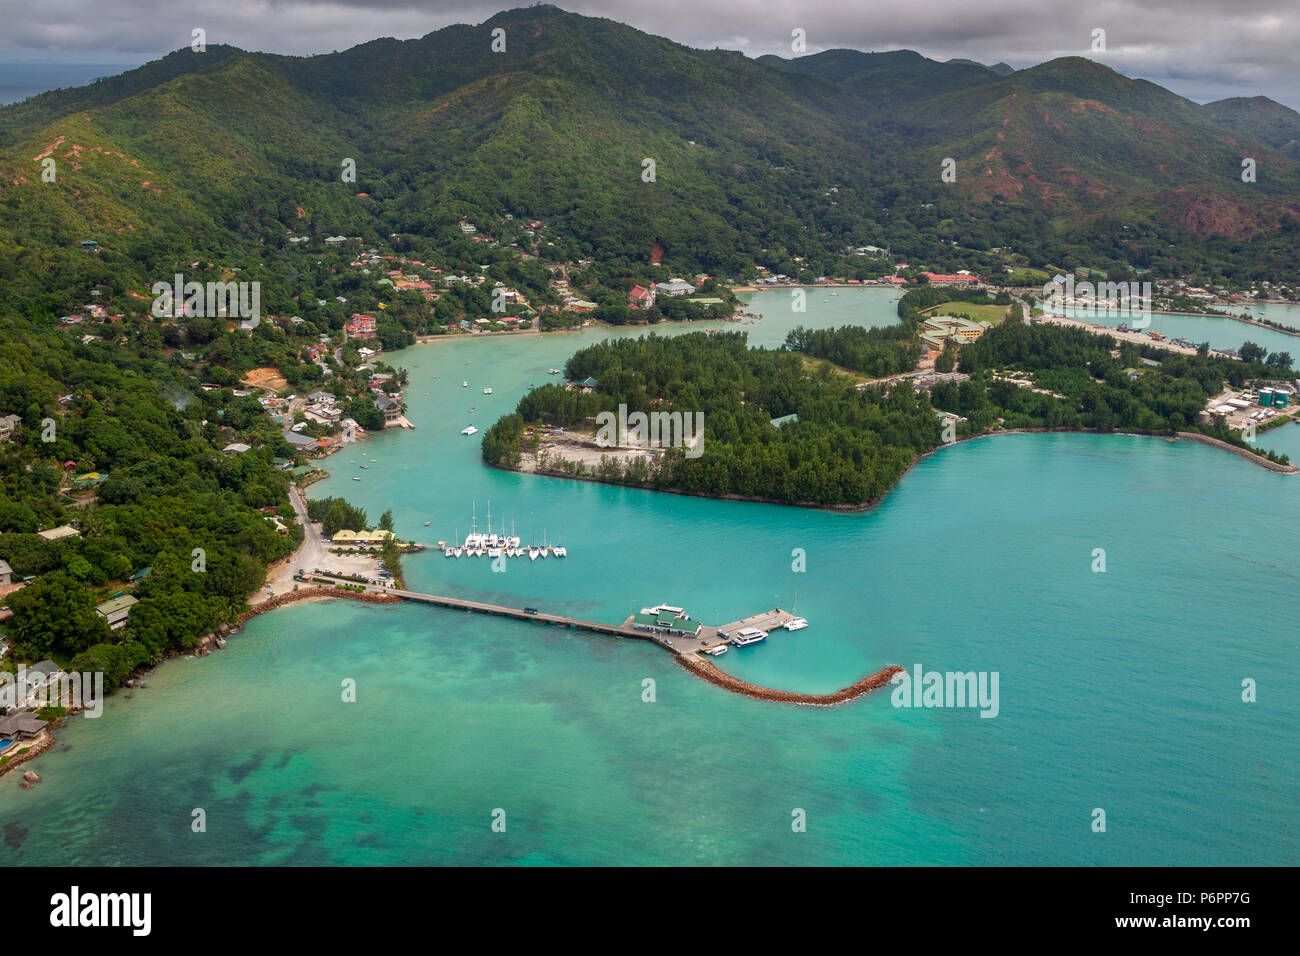 Aerial view of Baie Sainte Anne and the harbour of Praslin, Seychelles in the Indian Ocean. Stock Photo